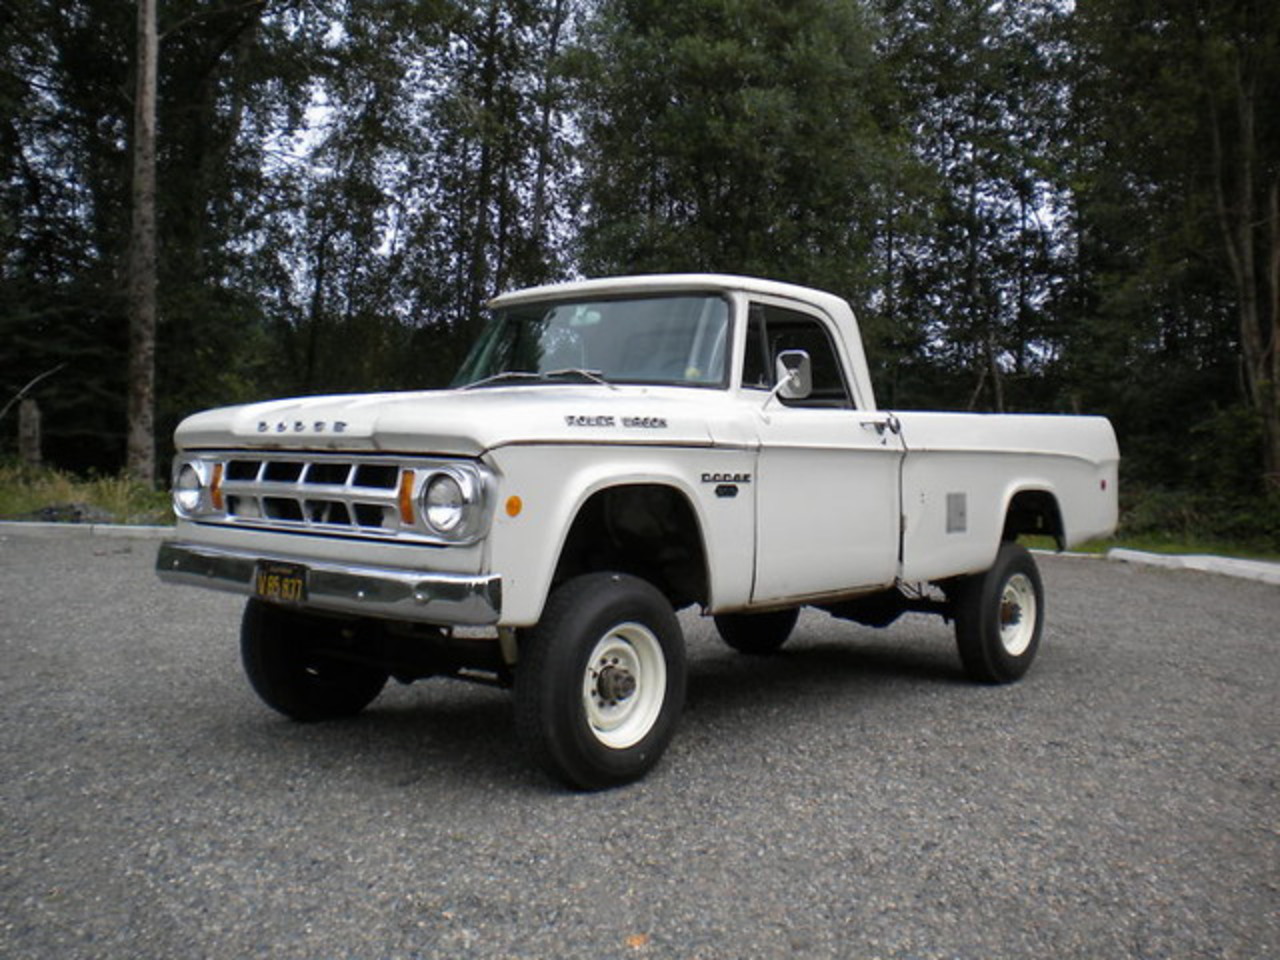 Vintage 1968 Dodge W200 Power Wagon. Bought from the original owner.